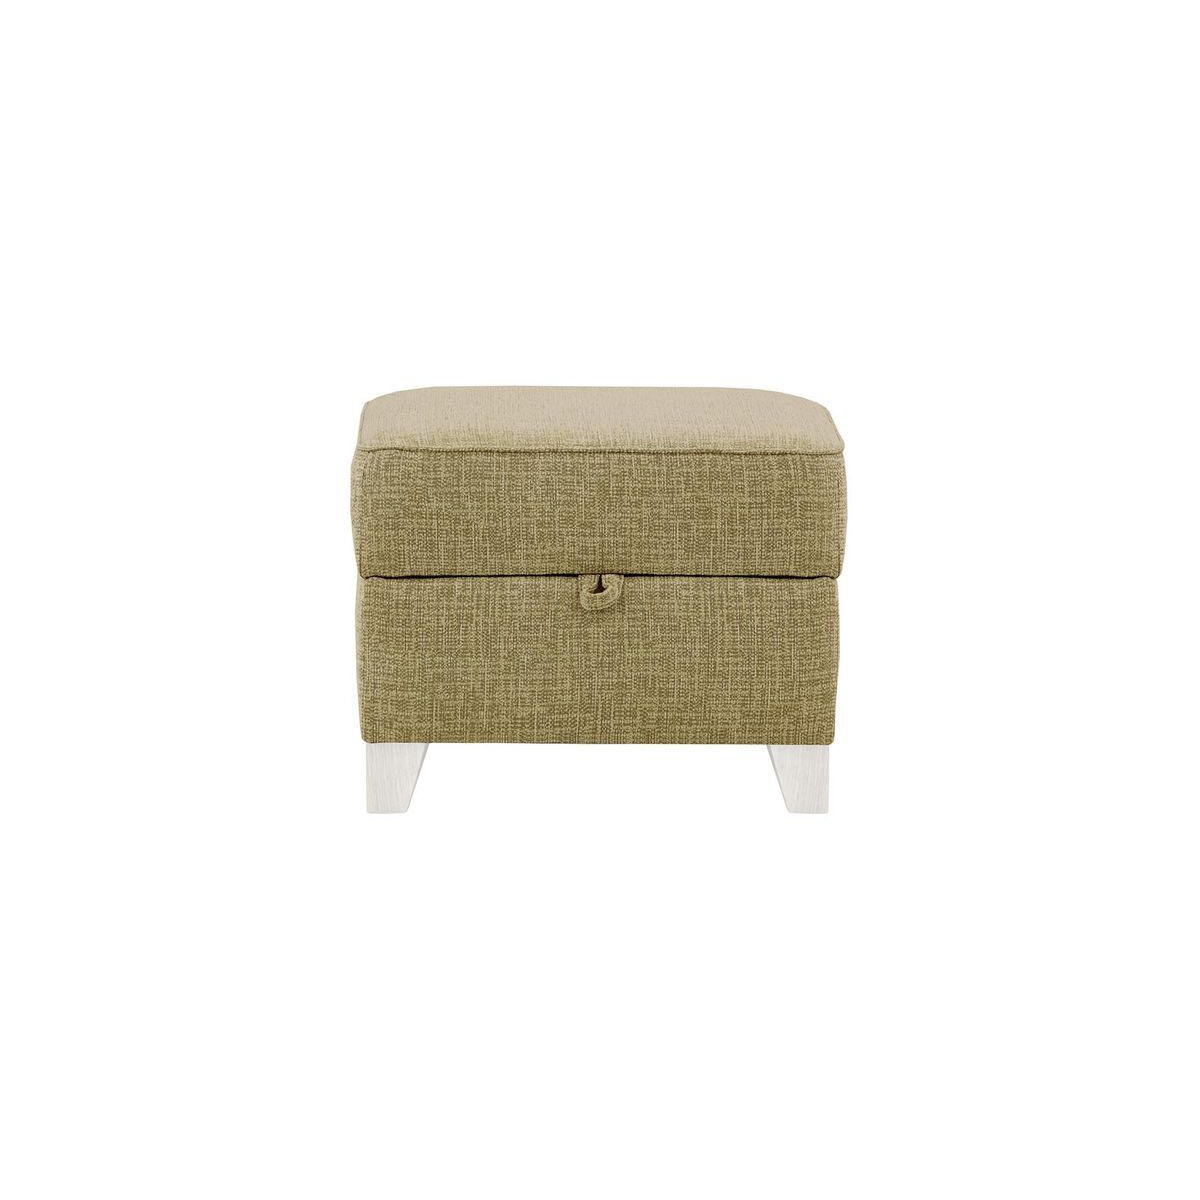 James Footstool with Storage, brown, Leg colour: white - image 1